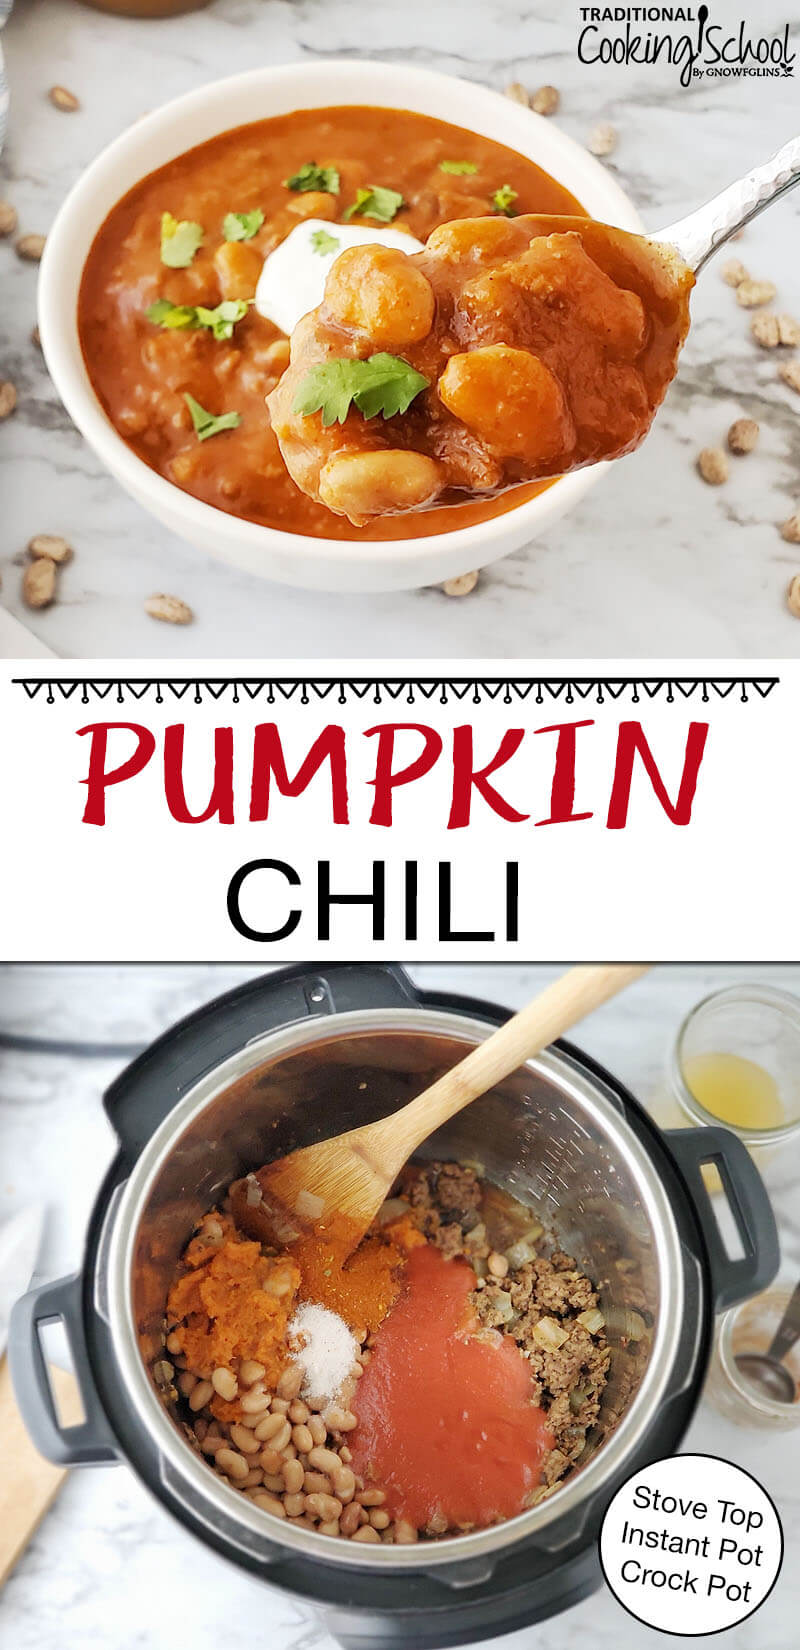 Photo collage of chili ingredients in the Instant Pot, and a bowl of chili garnished with fresh herbs, sour cream, and a slice of pepper. Text overlay says: "Pumpkin Chili (Stove Top, Instant Pot, Crock Pot)"